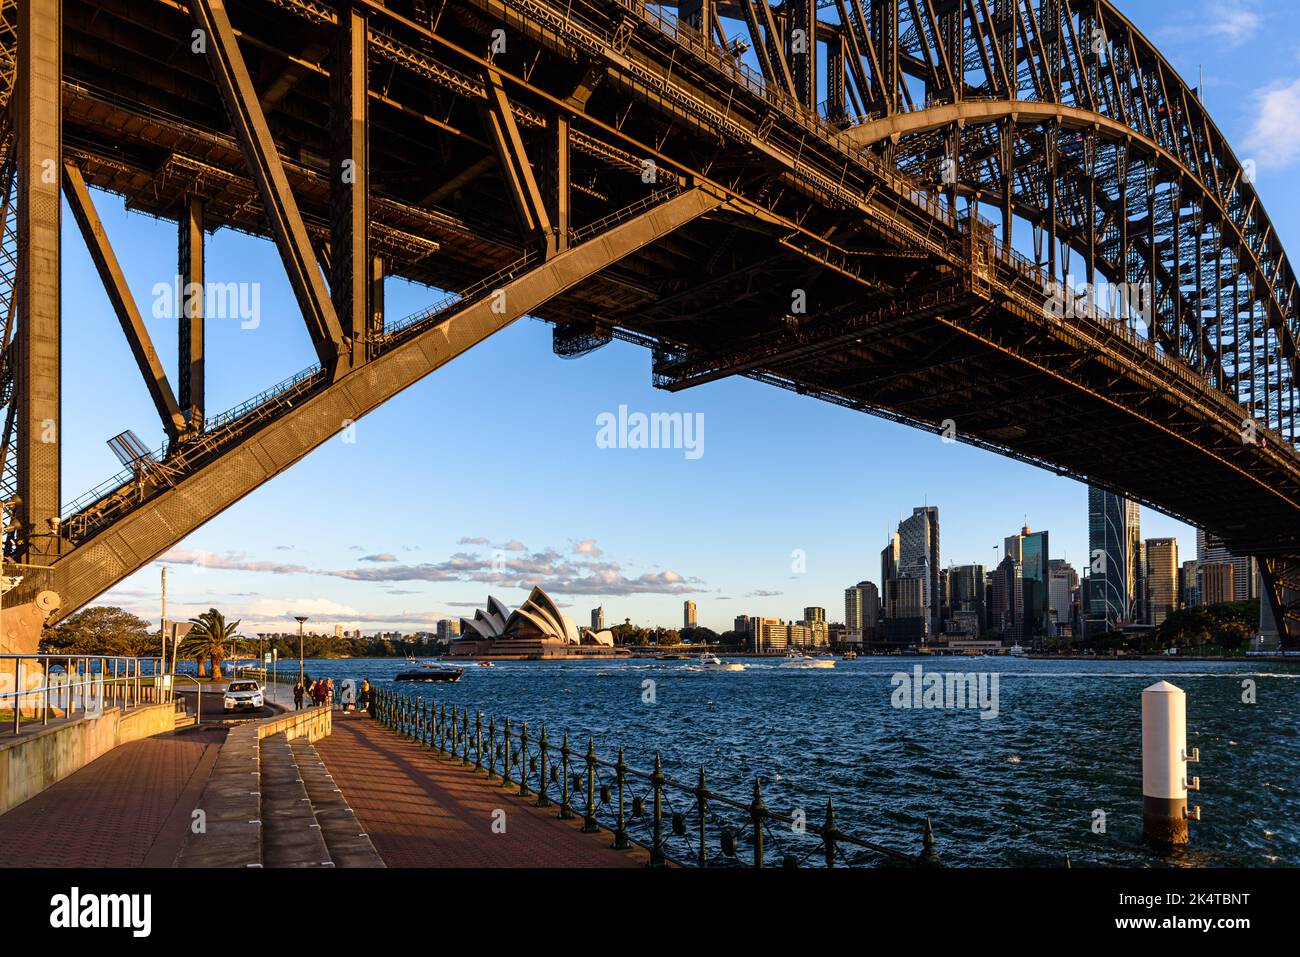 The Sydney Opera House and Circular Quay visible beneath the Sydney Harbour Bridge at golden hour Stock Photo